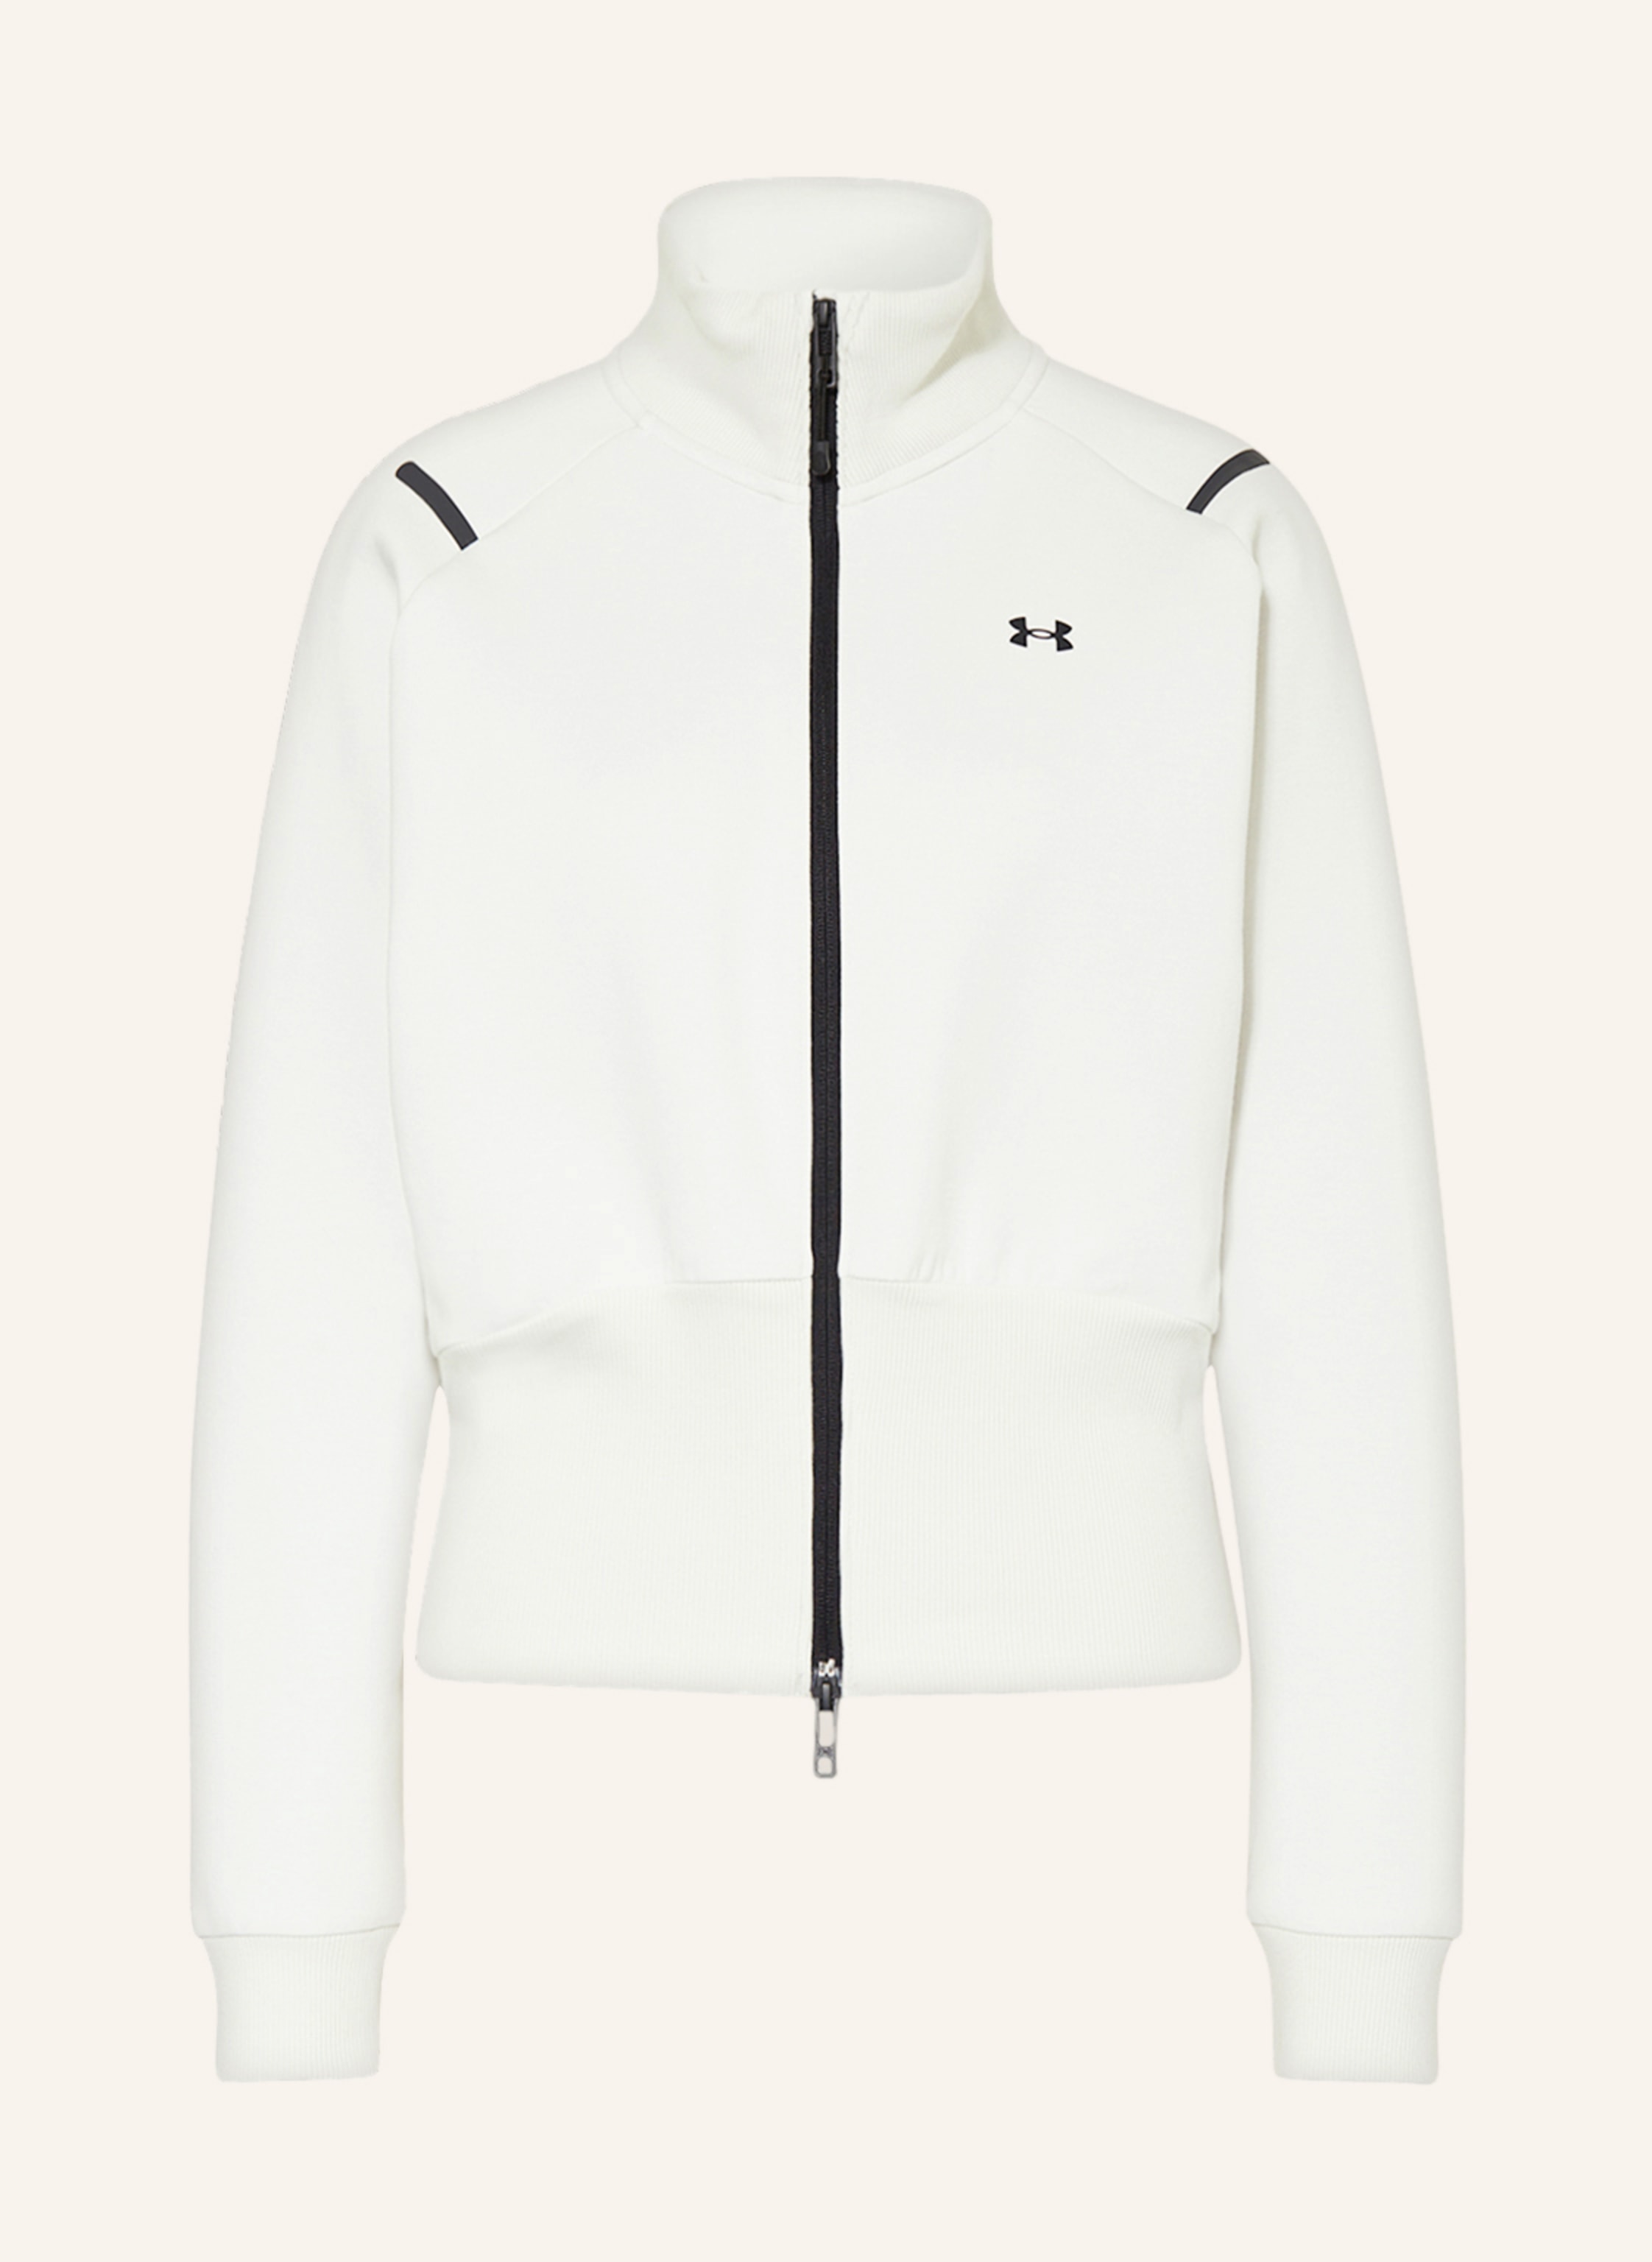 UNDER ARMOUR Trainingsjacke UA UNSTOPPABLE in creme